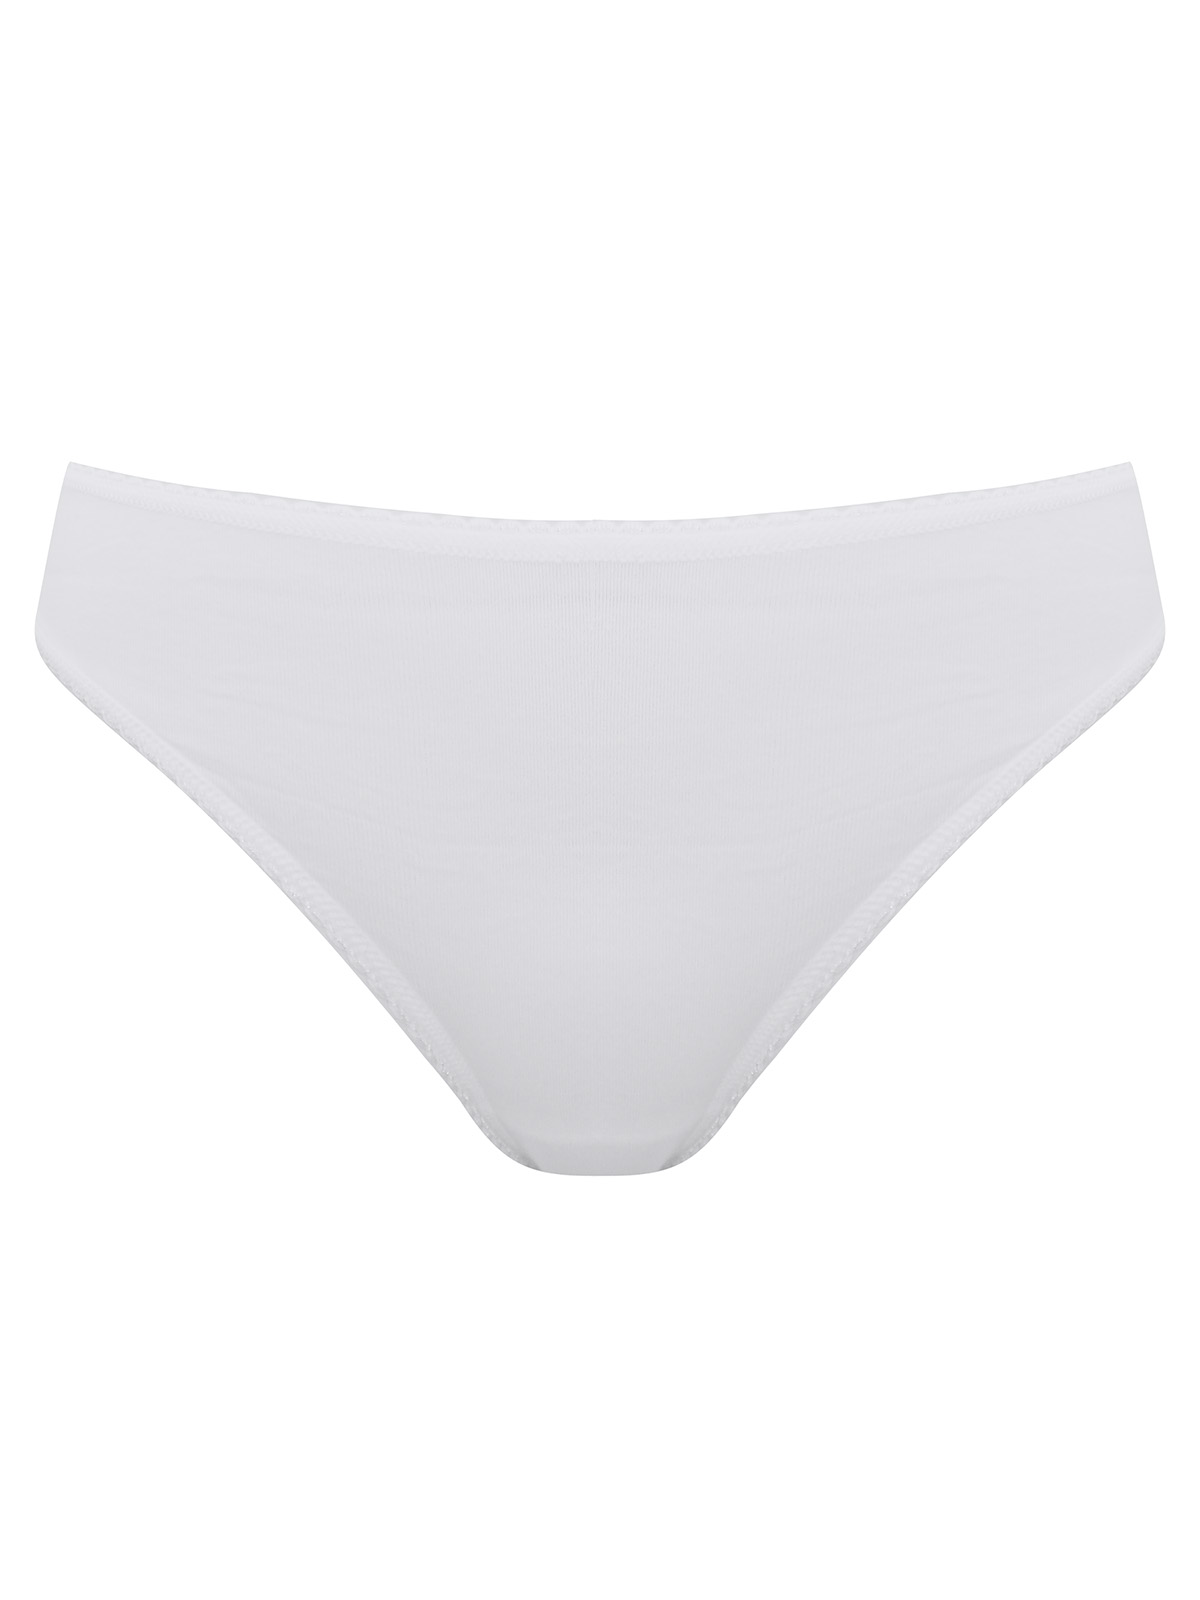 Marks and Spencer - - M&5 WHITE Cotton Rich Brazilian Knickers - Plus ...